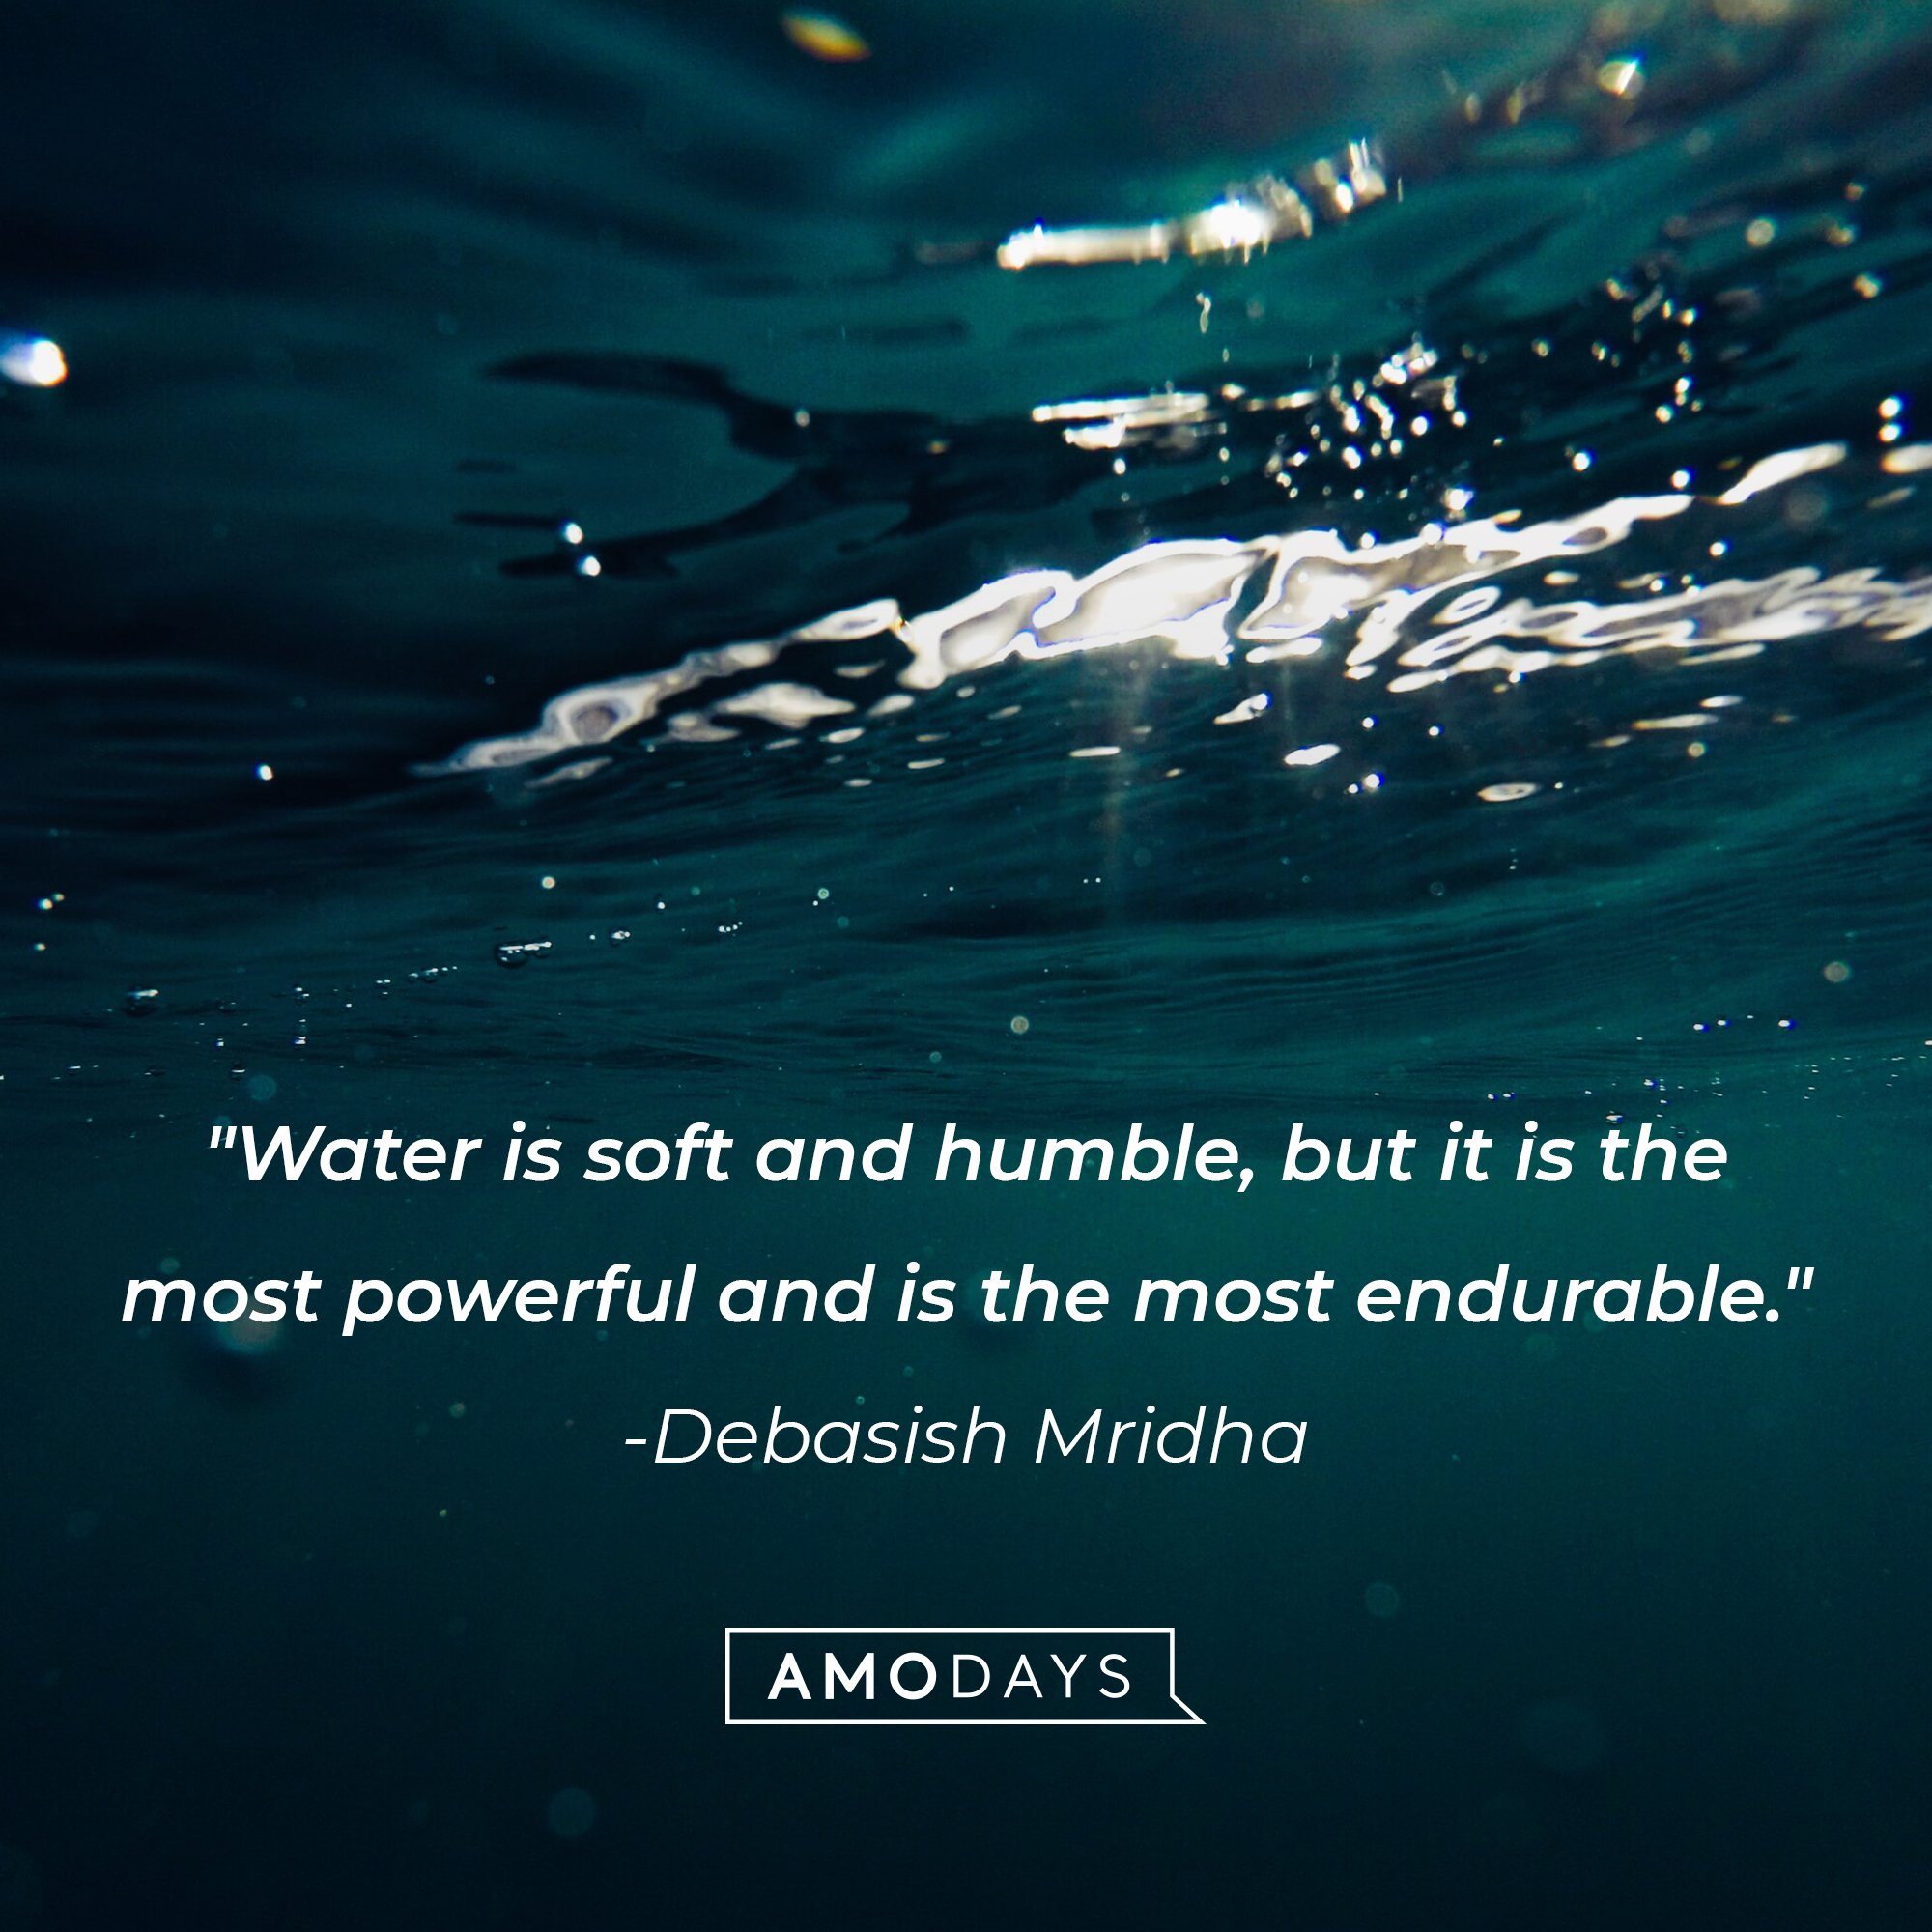 Debasish Mridha’s quote: "Water is soft and humble, but it is the most powerful and is the most endurable." | Image: AmoDays